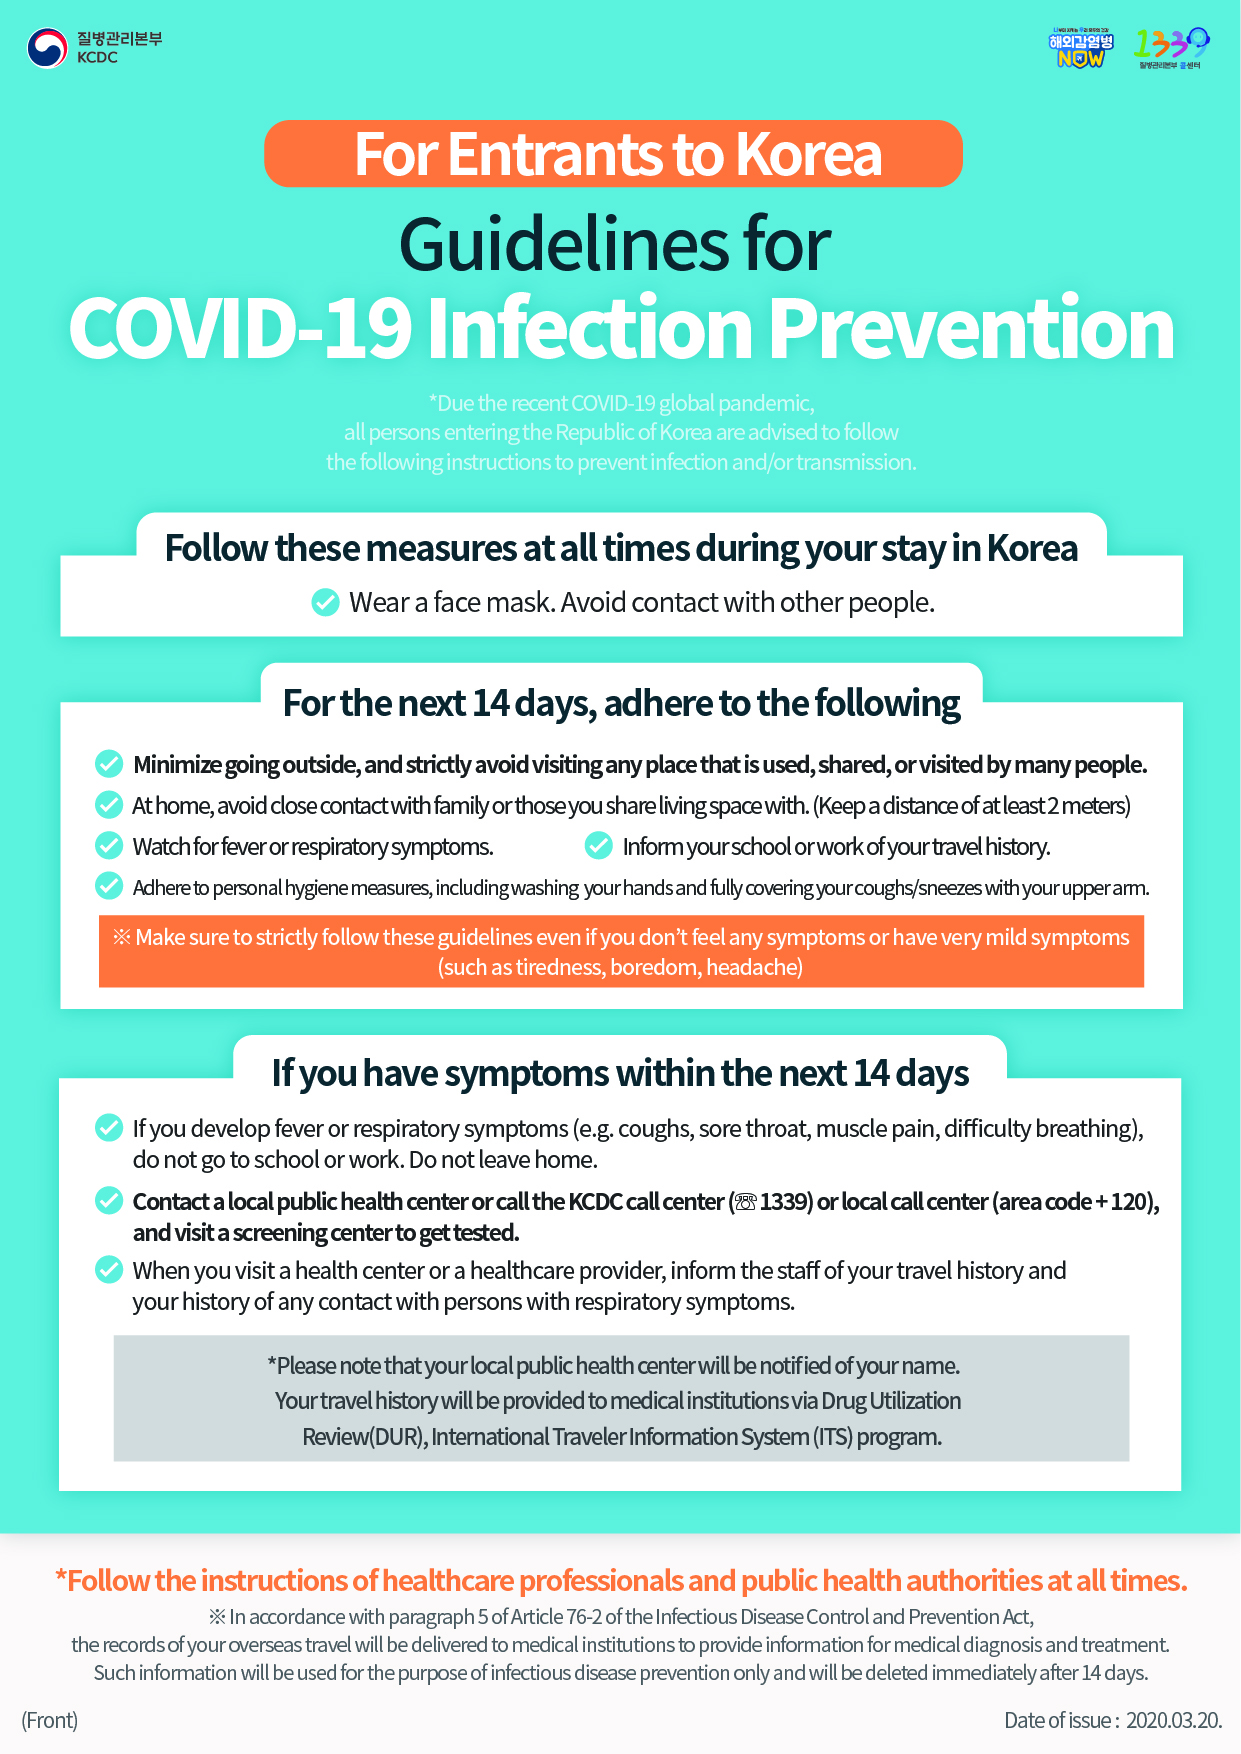 For Entrants to Korea Guidelines for COVID-19 Infection Prevention